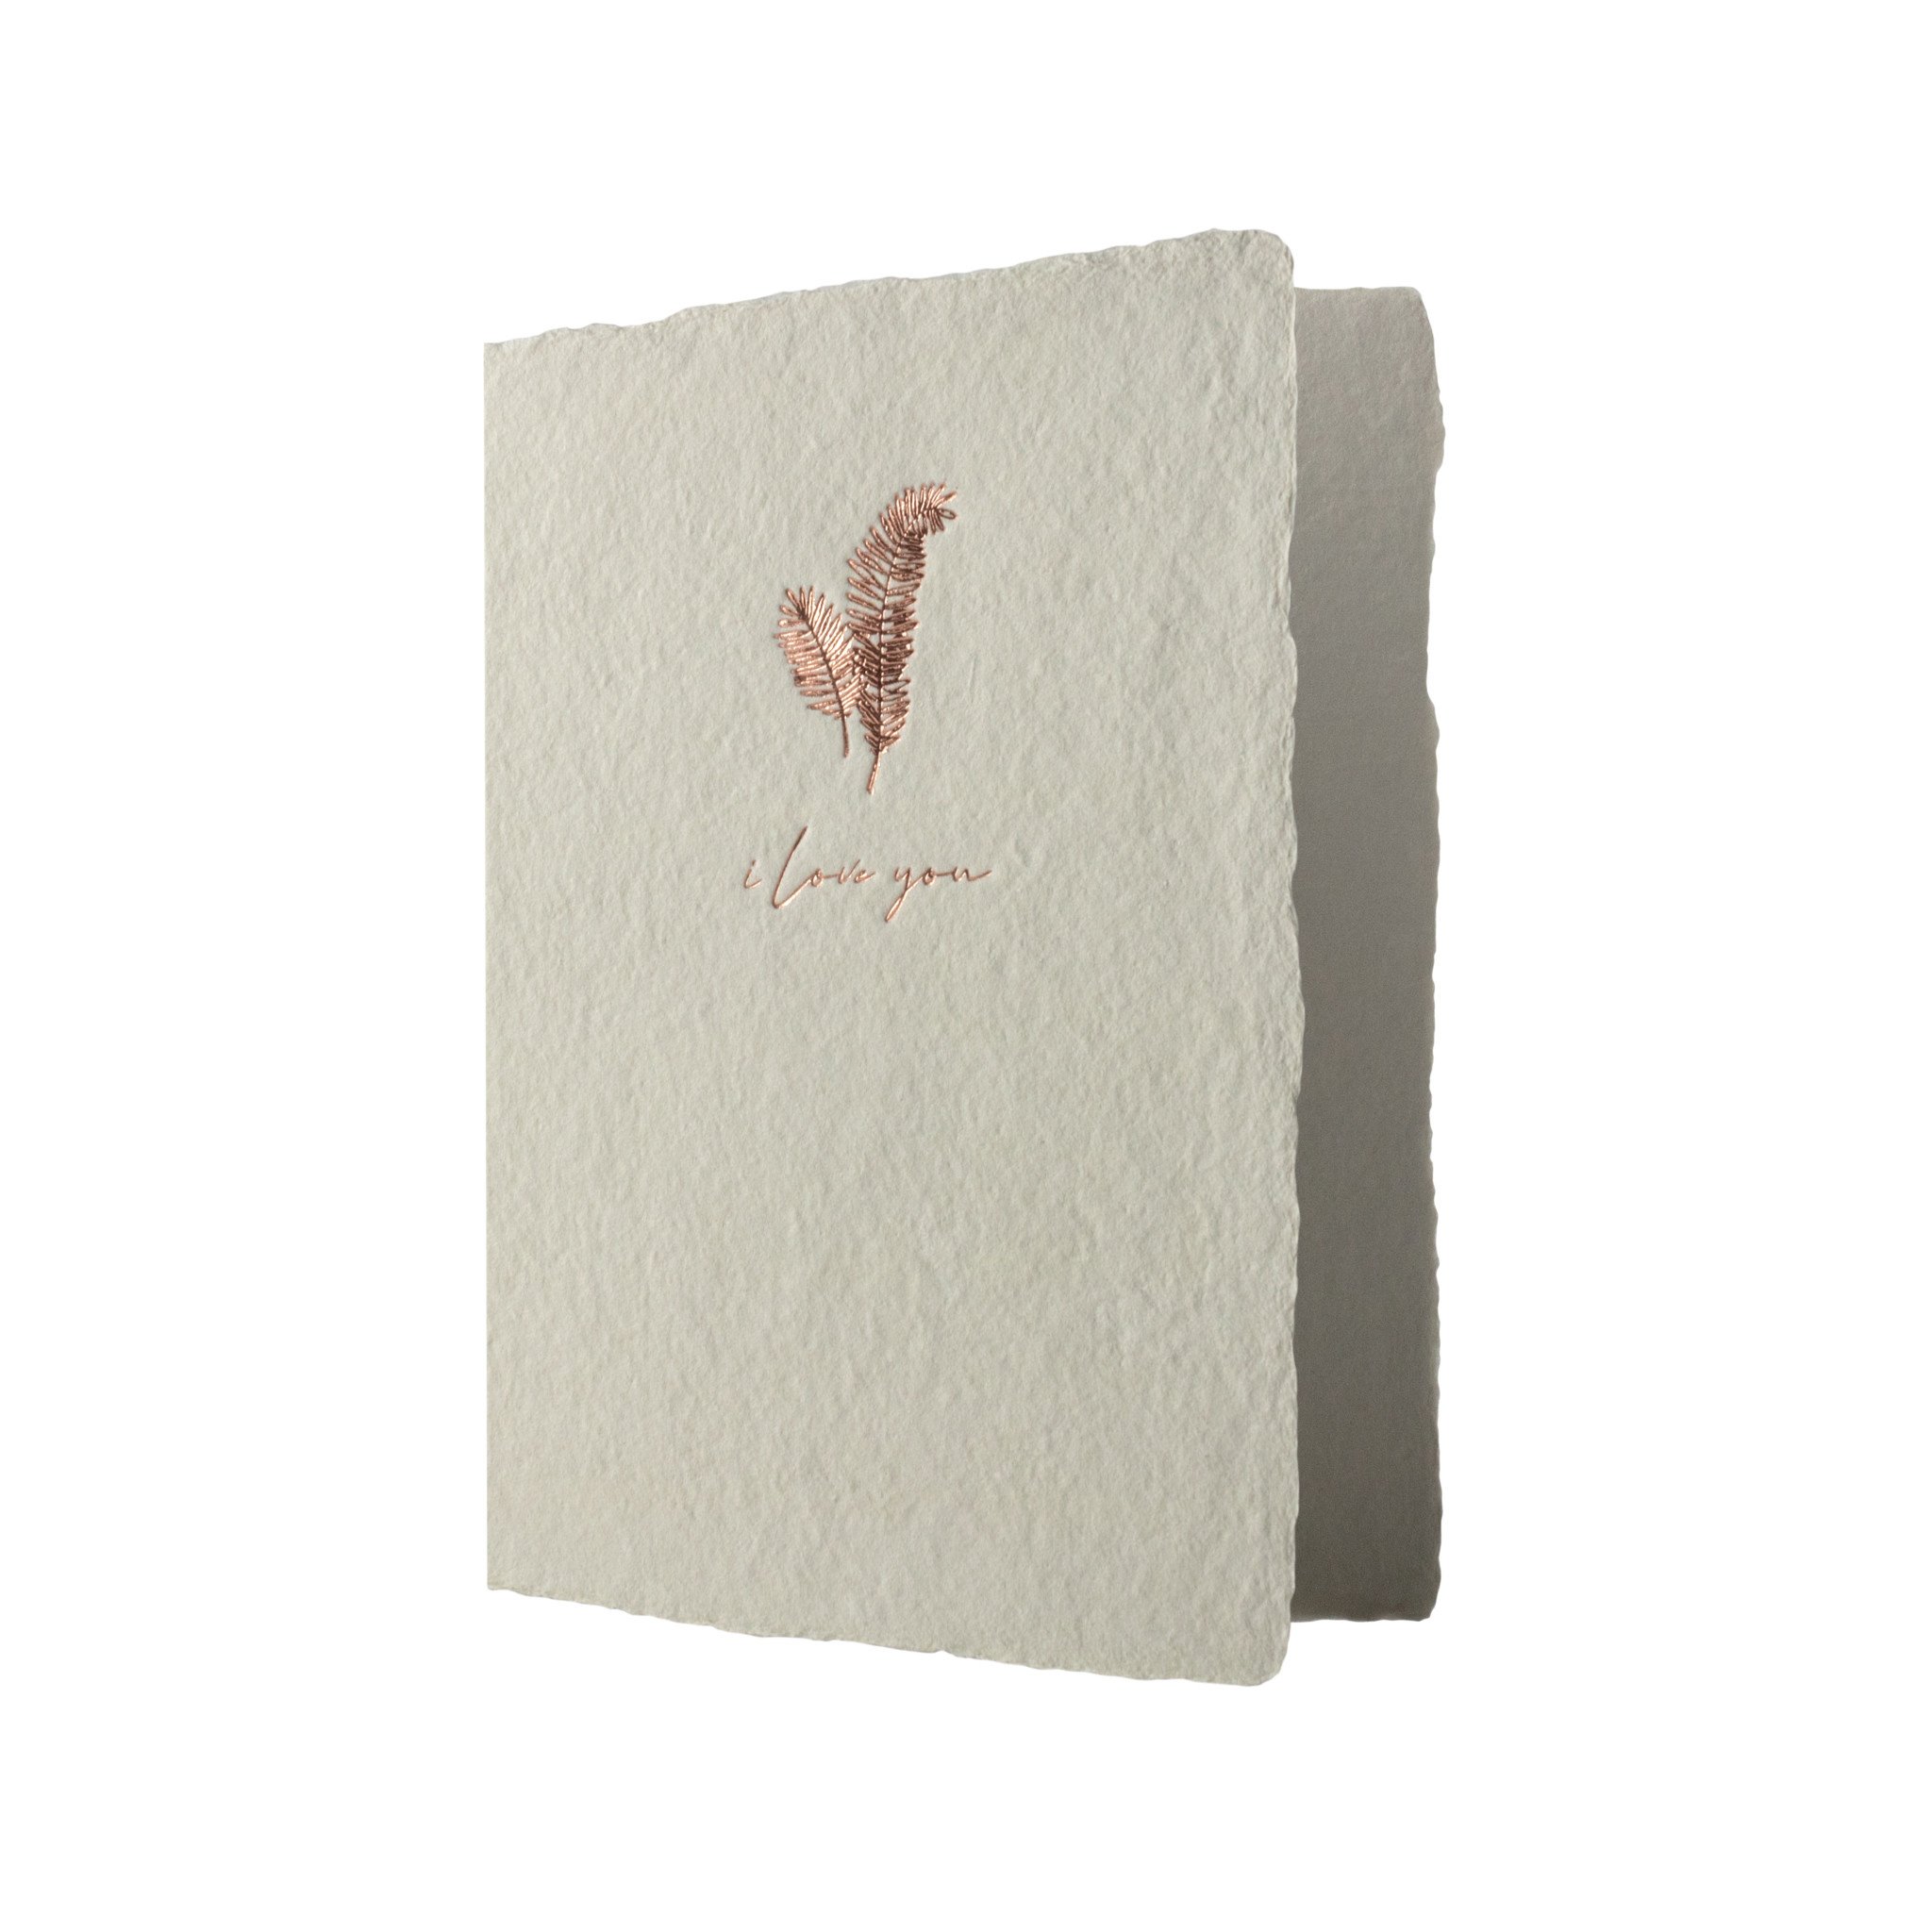 Wedding stationery blush deckle edge handmade recycled cotton paper. —  Feathers and Stone